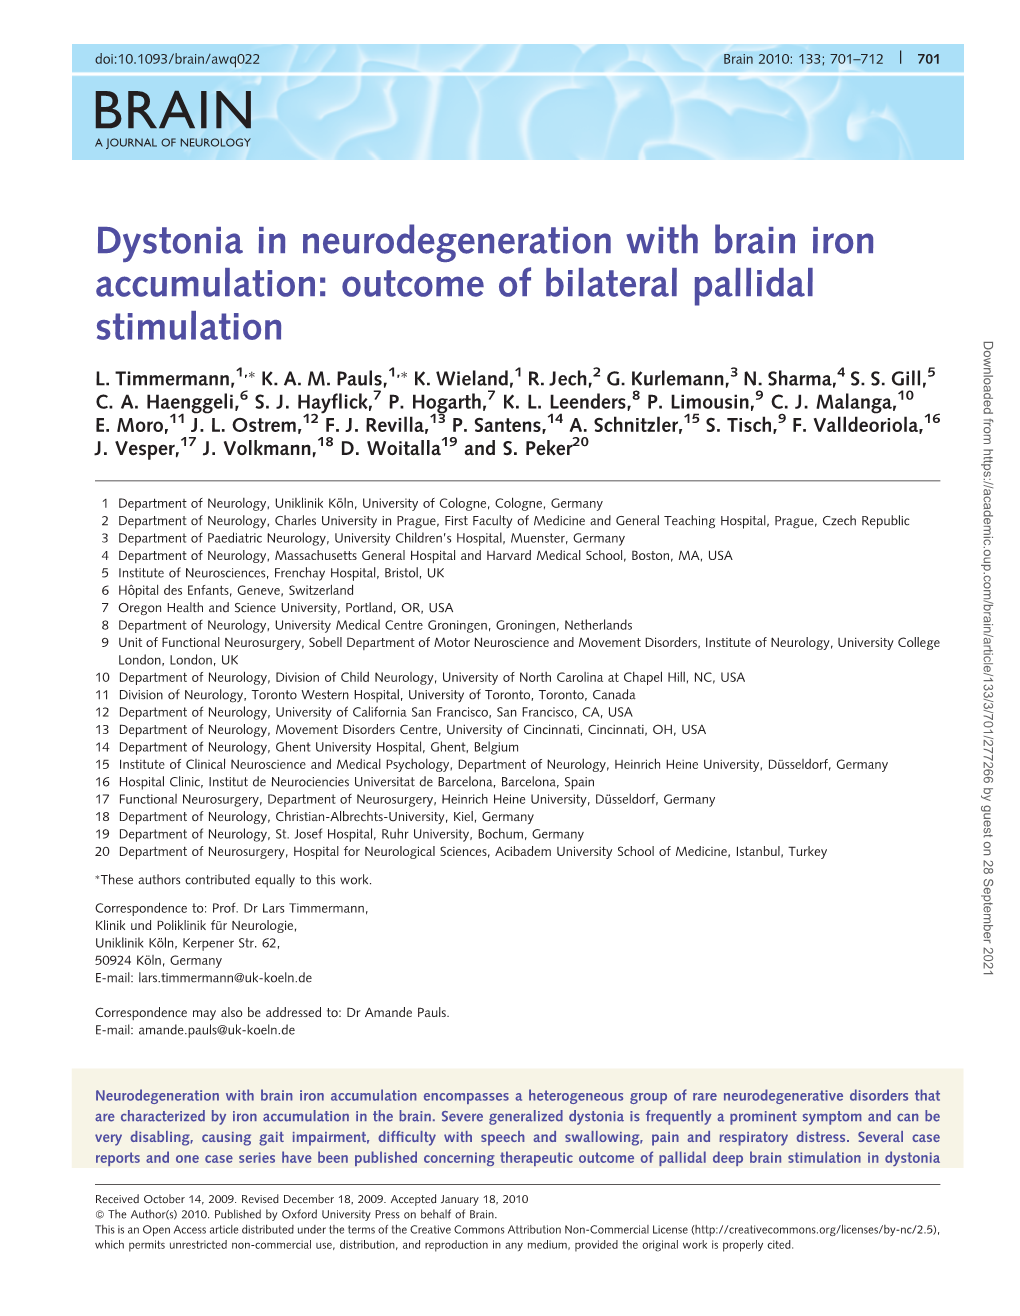 Dystonia in Neurodegeneration with Brain Iron Accumulation: Outcome of Bilateral Pallidal